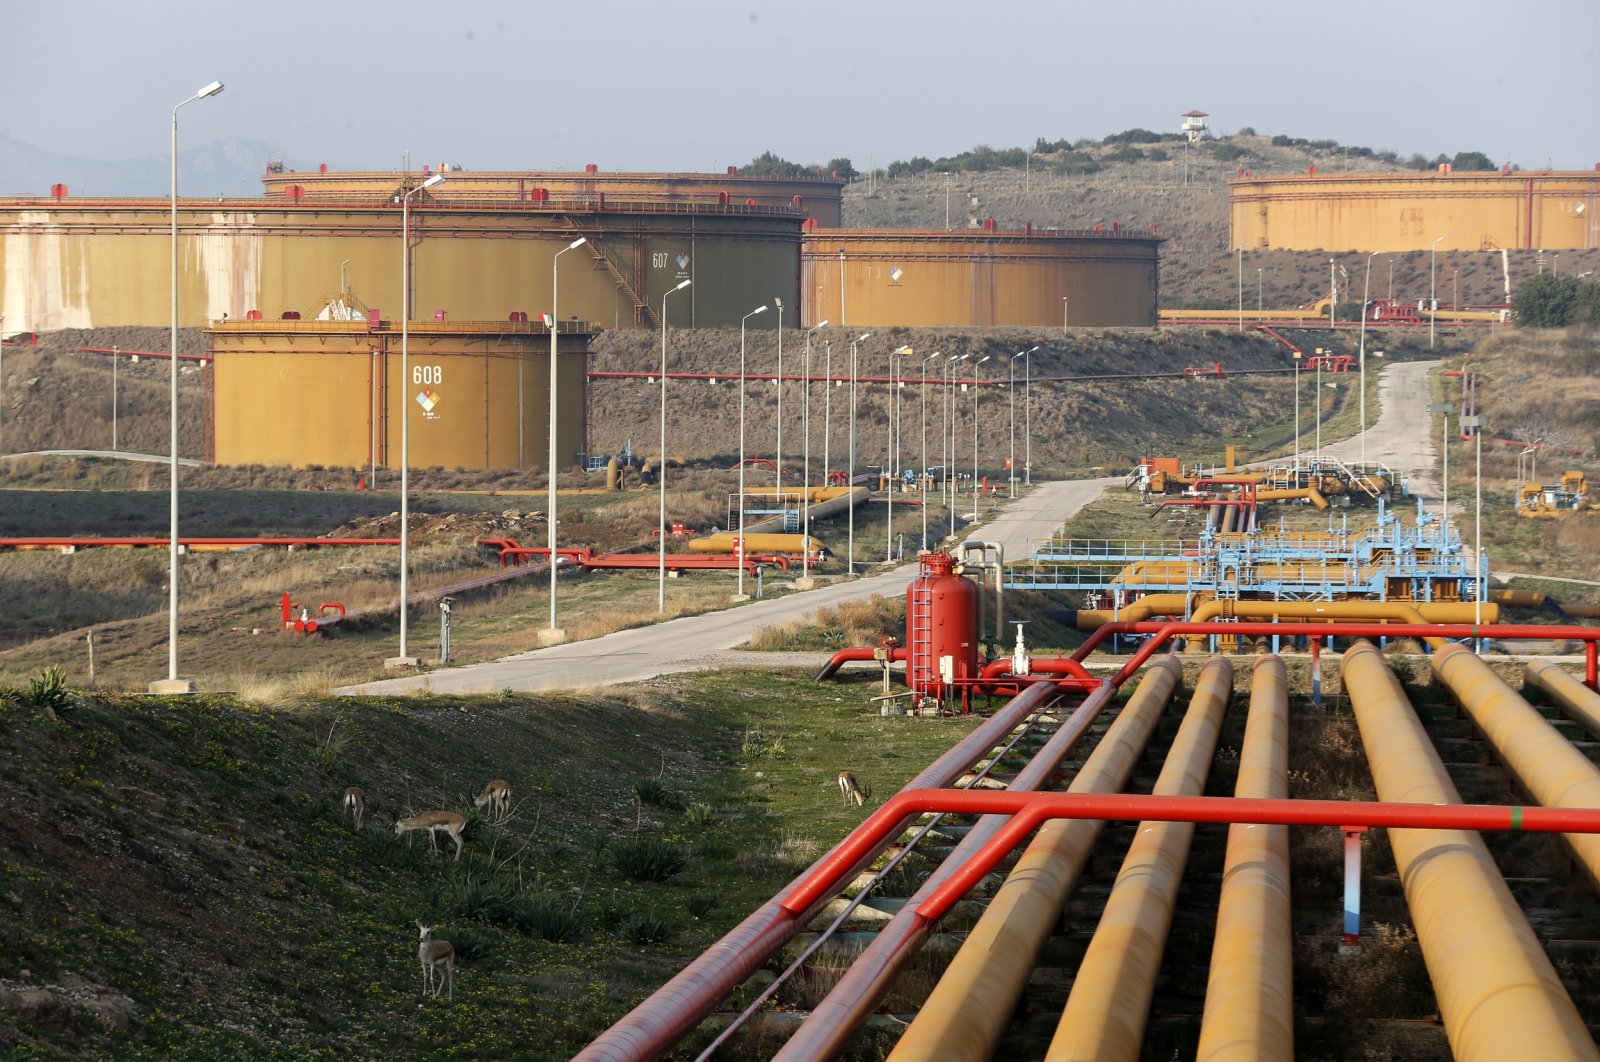 A general view of oil tanks at the Mediterranean port of Ceyhan, which is run by the state-owned Petroleum Pipeline Corporation (BOTAŞ), some 70 kilometers (43.5 miles) from Adana, Türkiye, Feb. 19, 2014. (Reuters Photo)